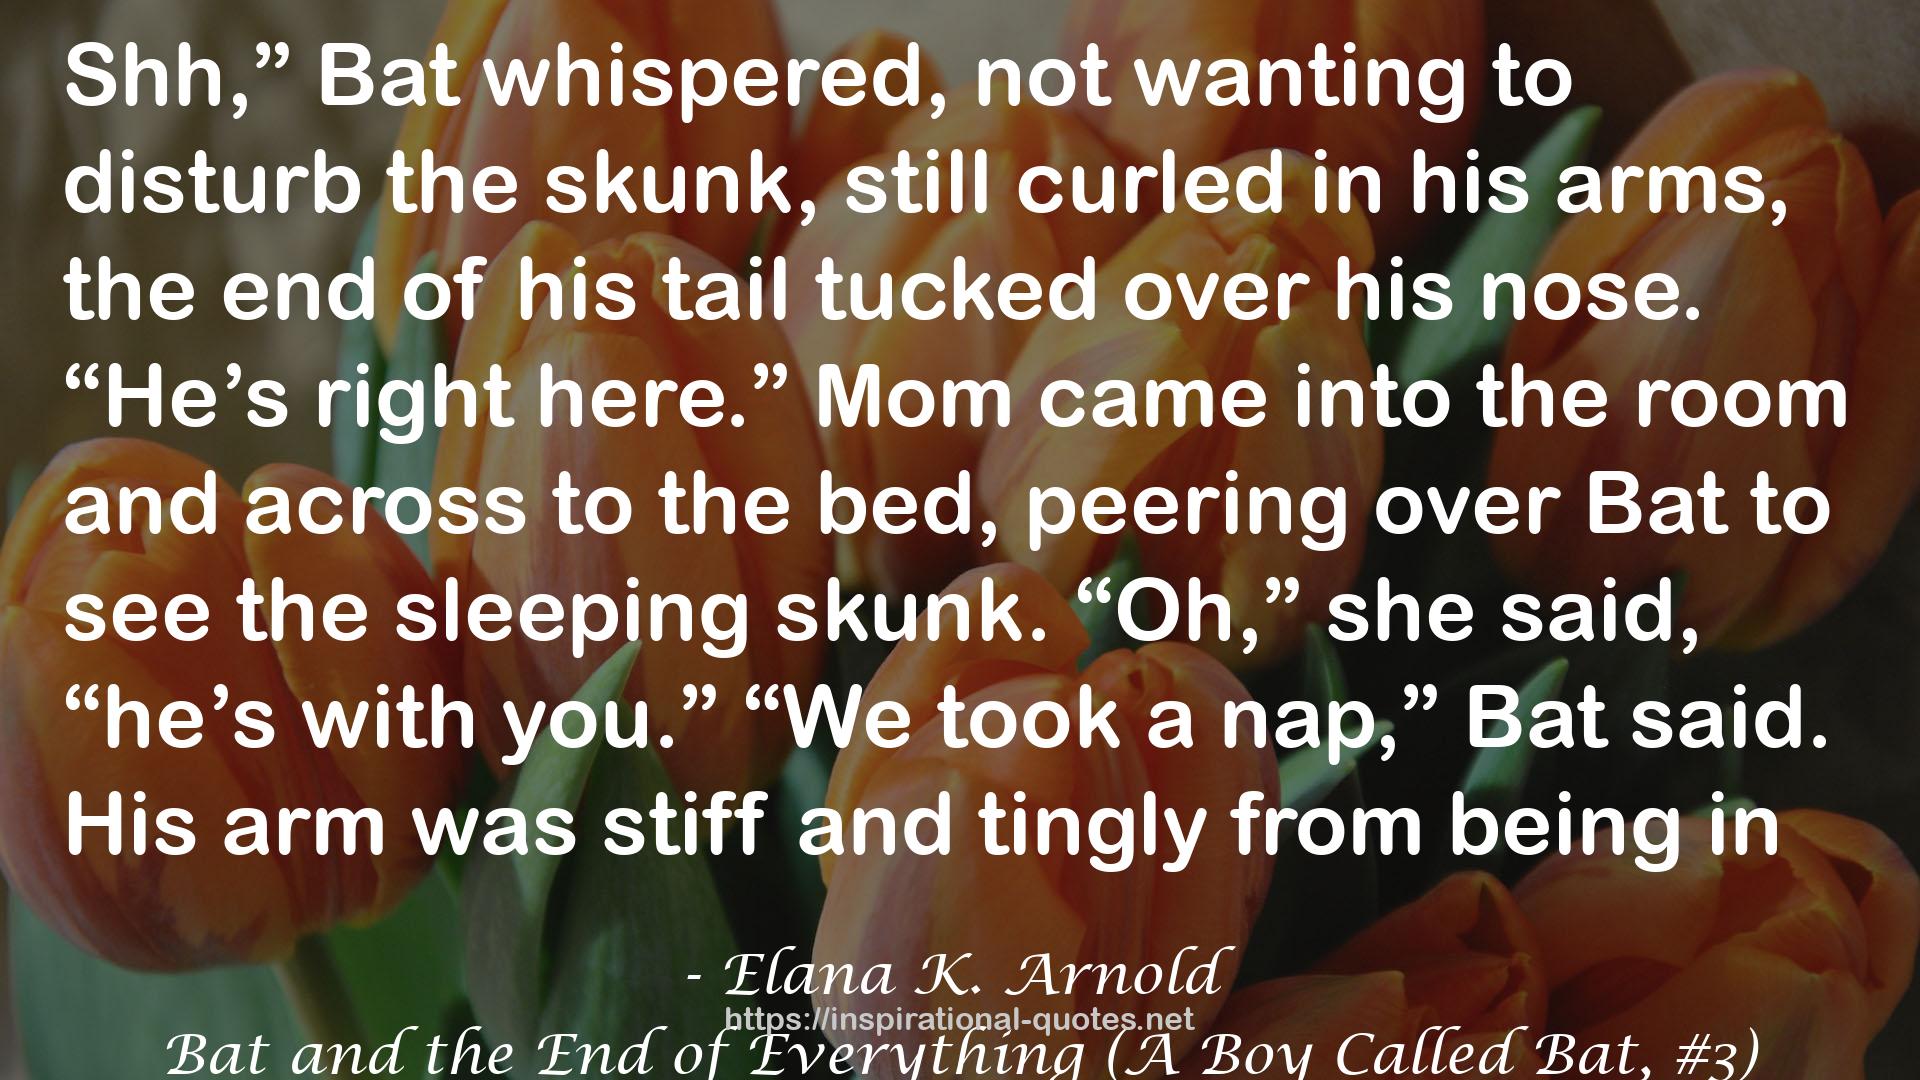 Bat and the End of Everything (A Boy Called Bat, #3) QUOTES